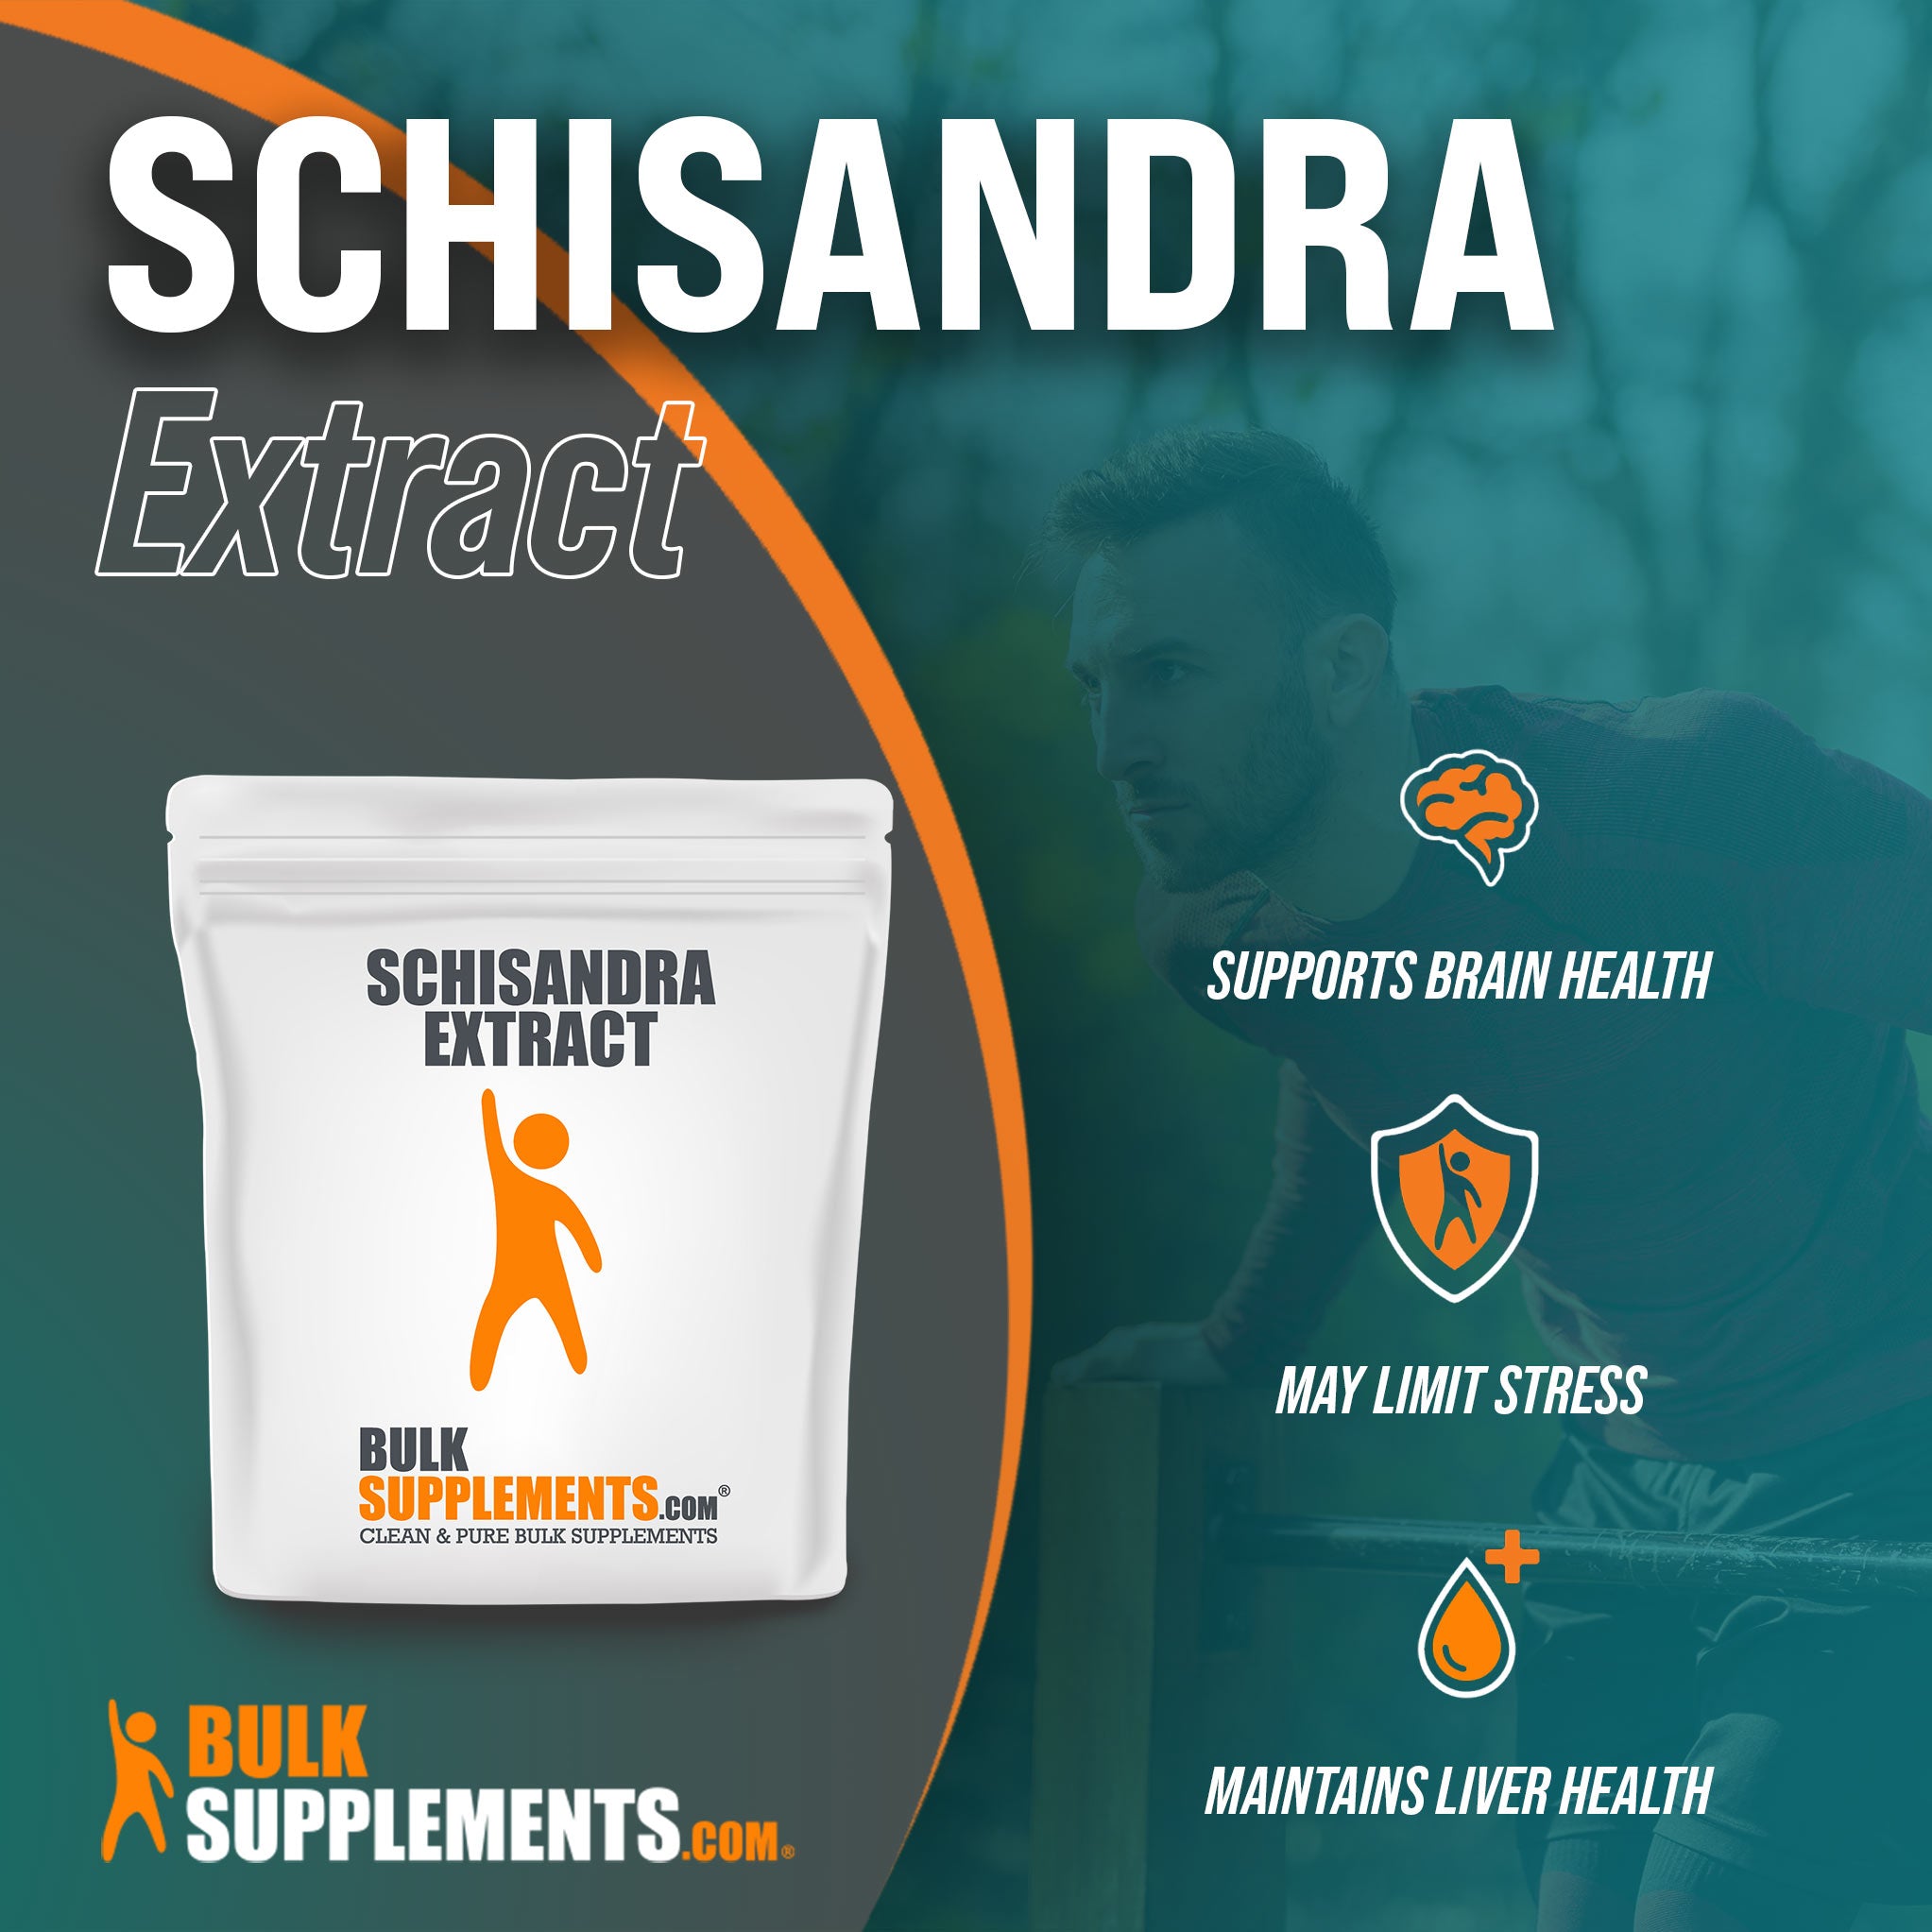 Benefits of Schisandra Extract: supports brain health, may limit stress, maintains liver health